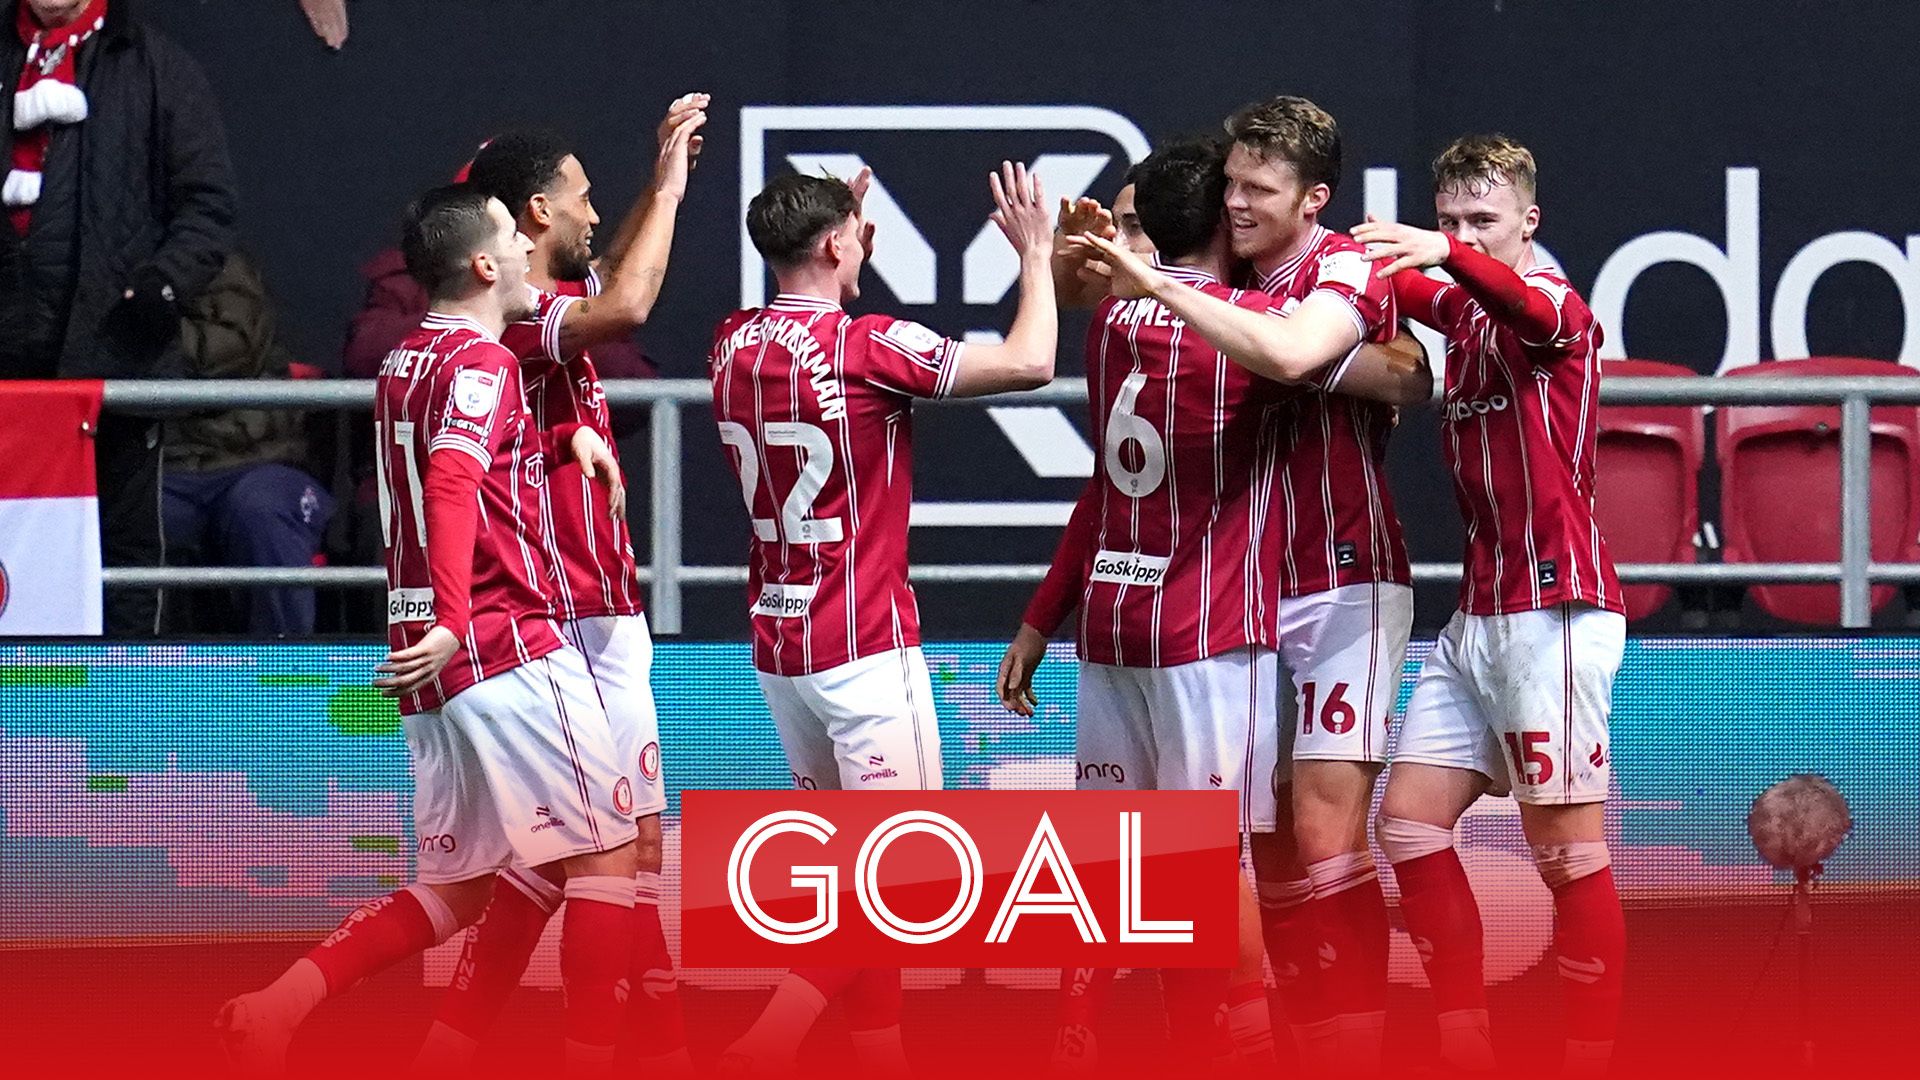 Bristol City double their lead over Southampton